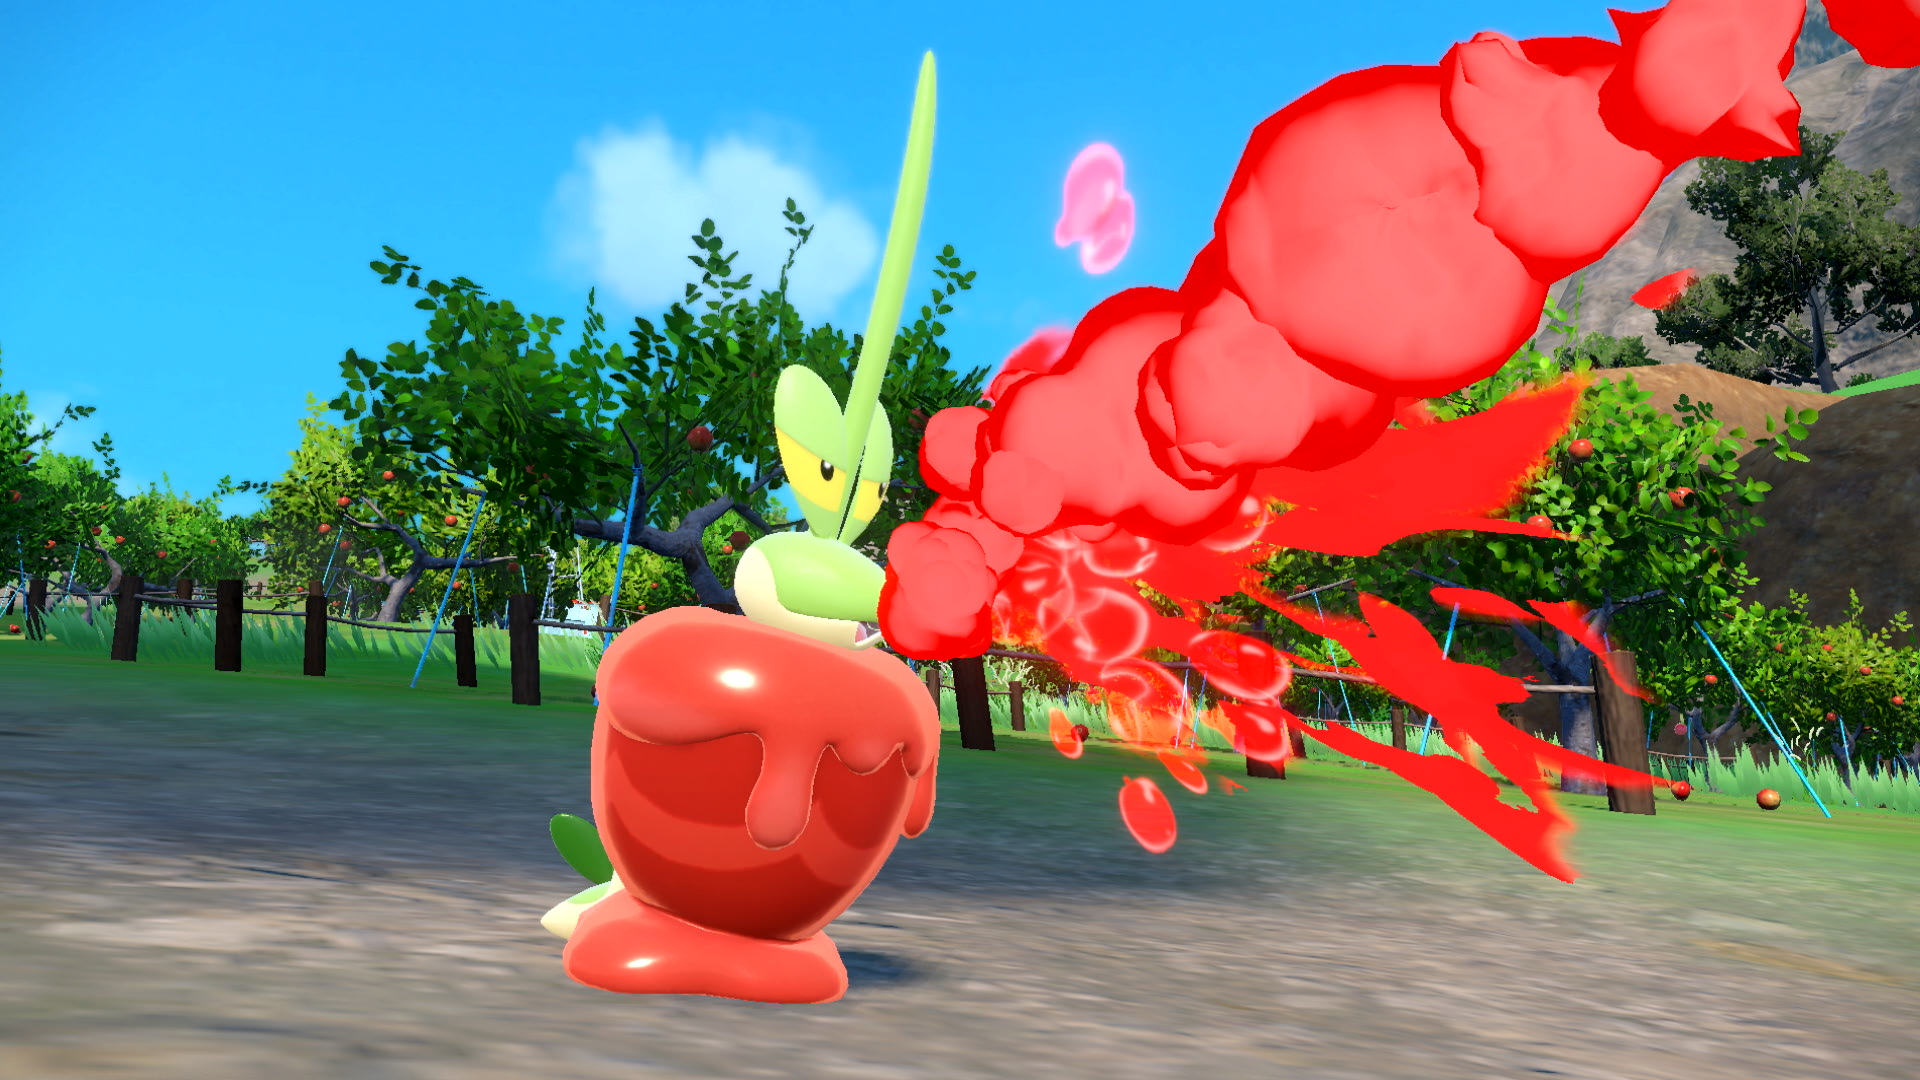 Pokemon Sword and Shield release date, gameplay revealed during